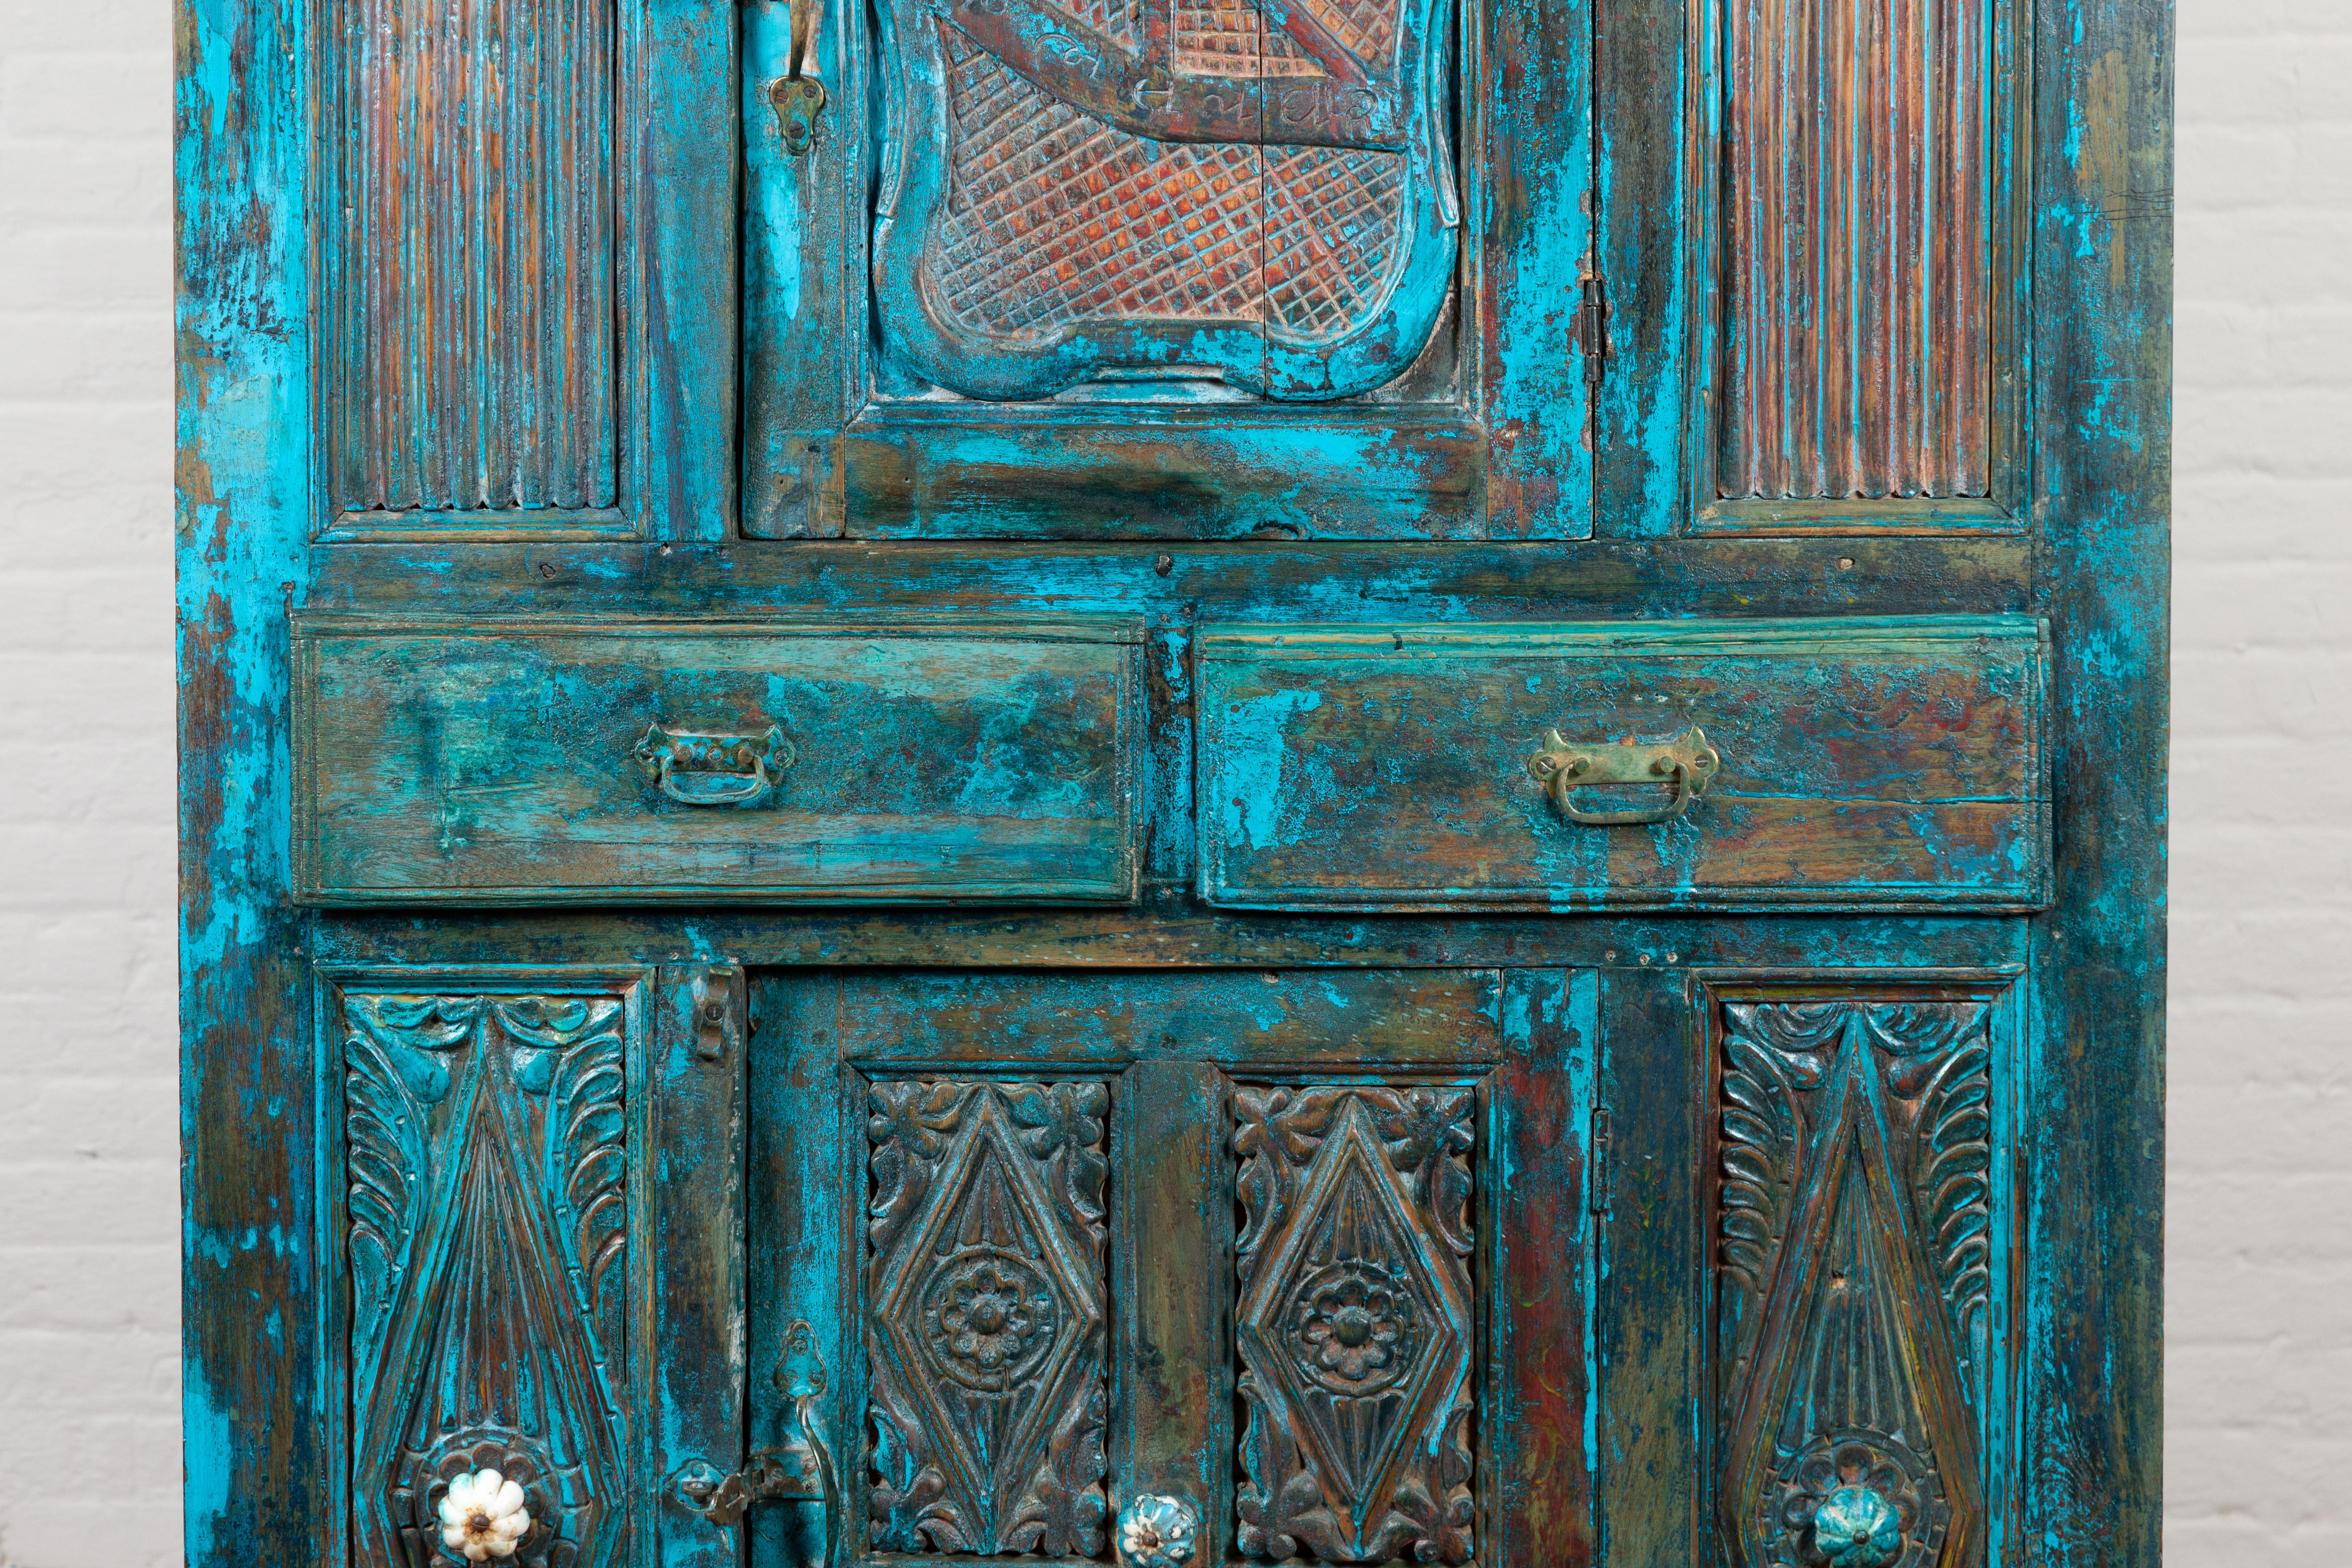 Wood Indian 19th Century Royal Teal Painted Cabinet with Carved Doors and Two Drawers For Sale